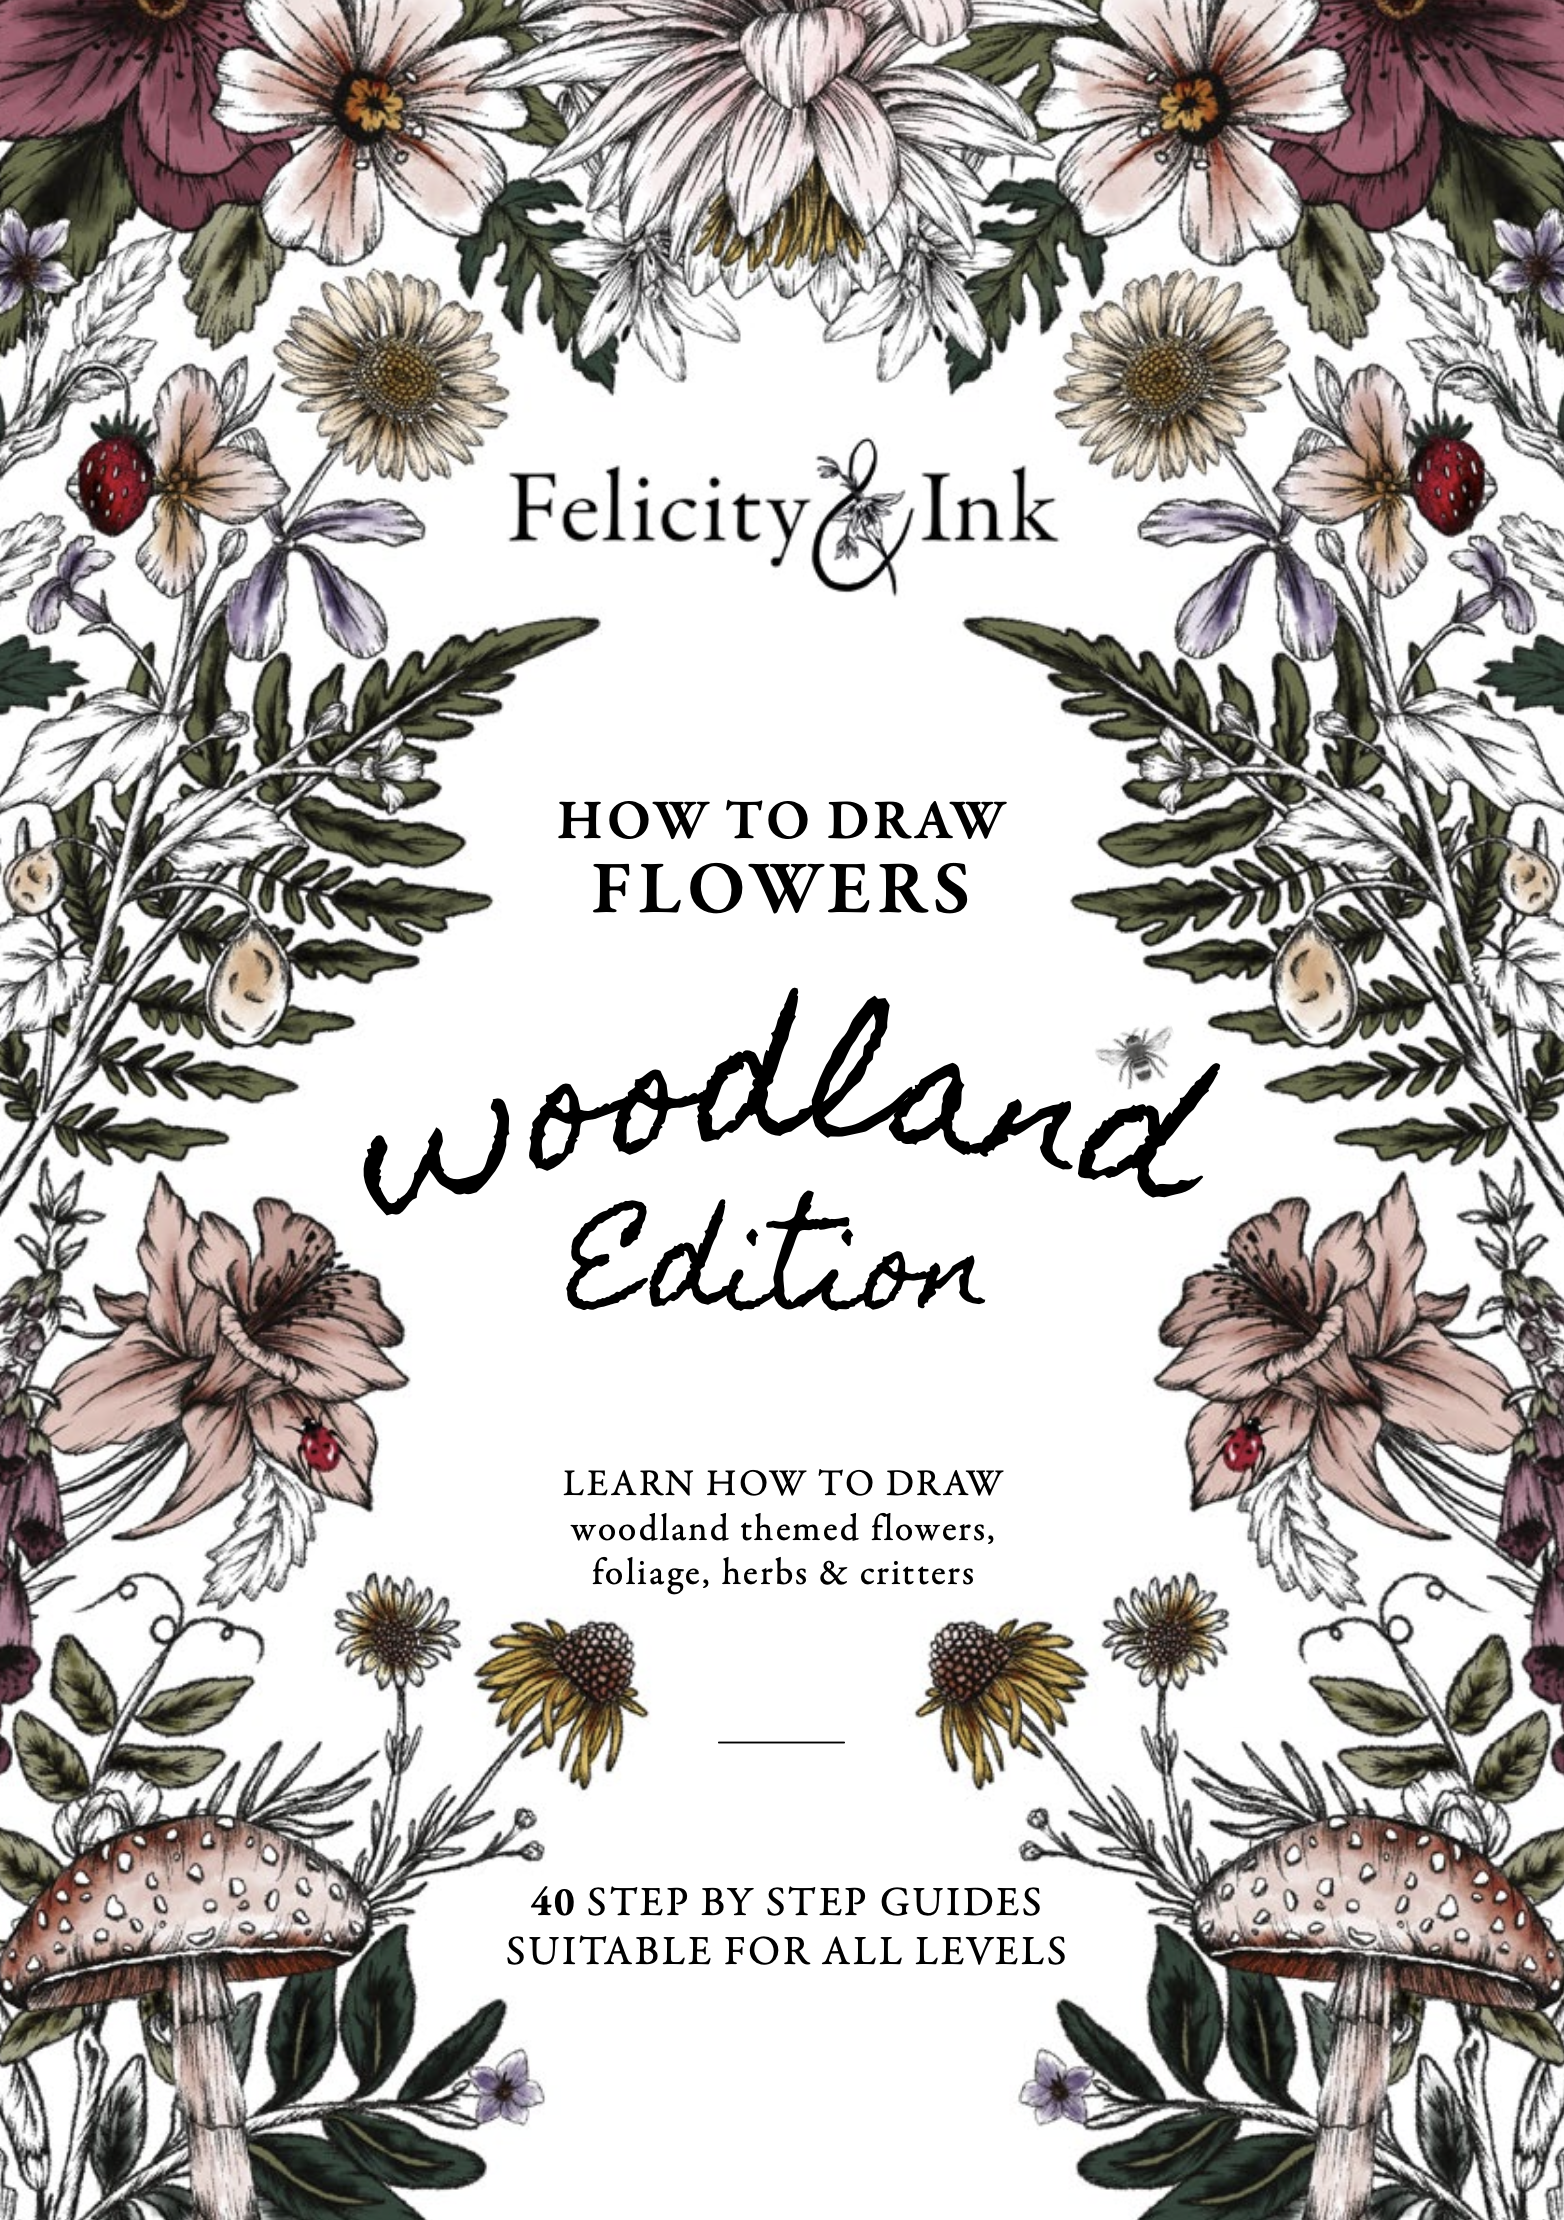 How To Draw Flowers - Woodland Edition